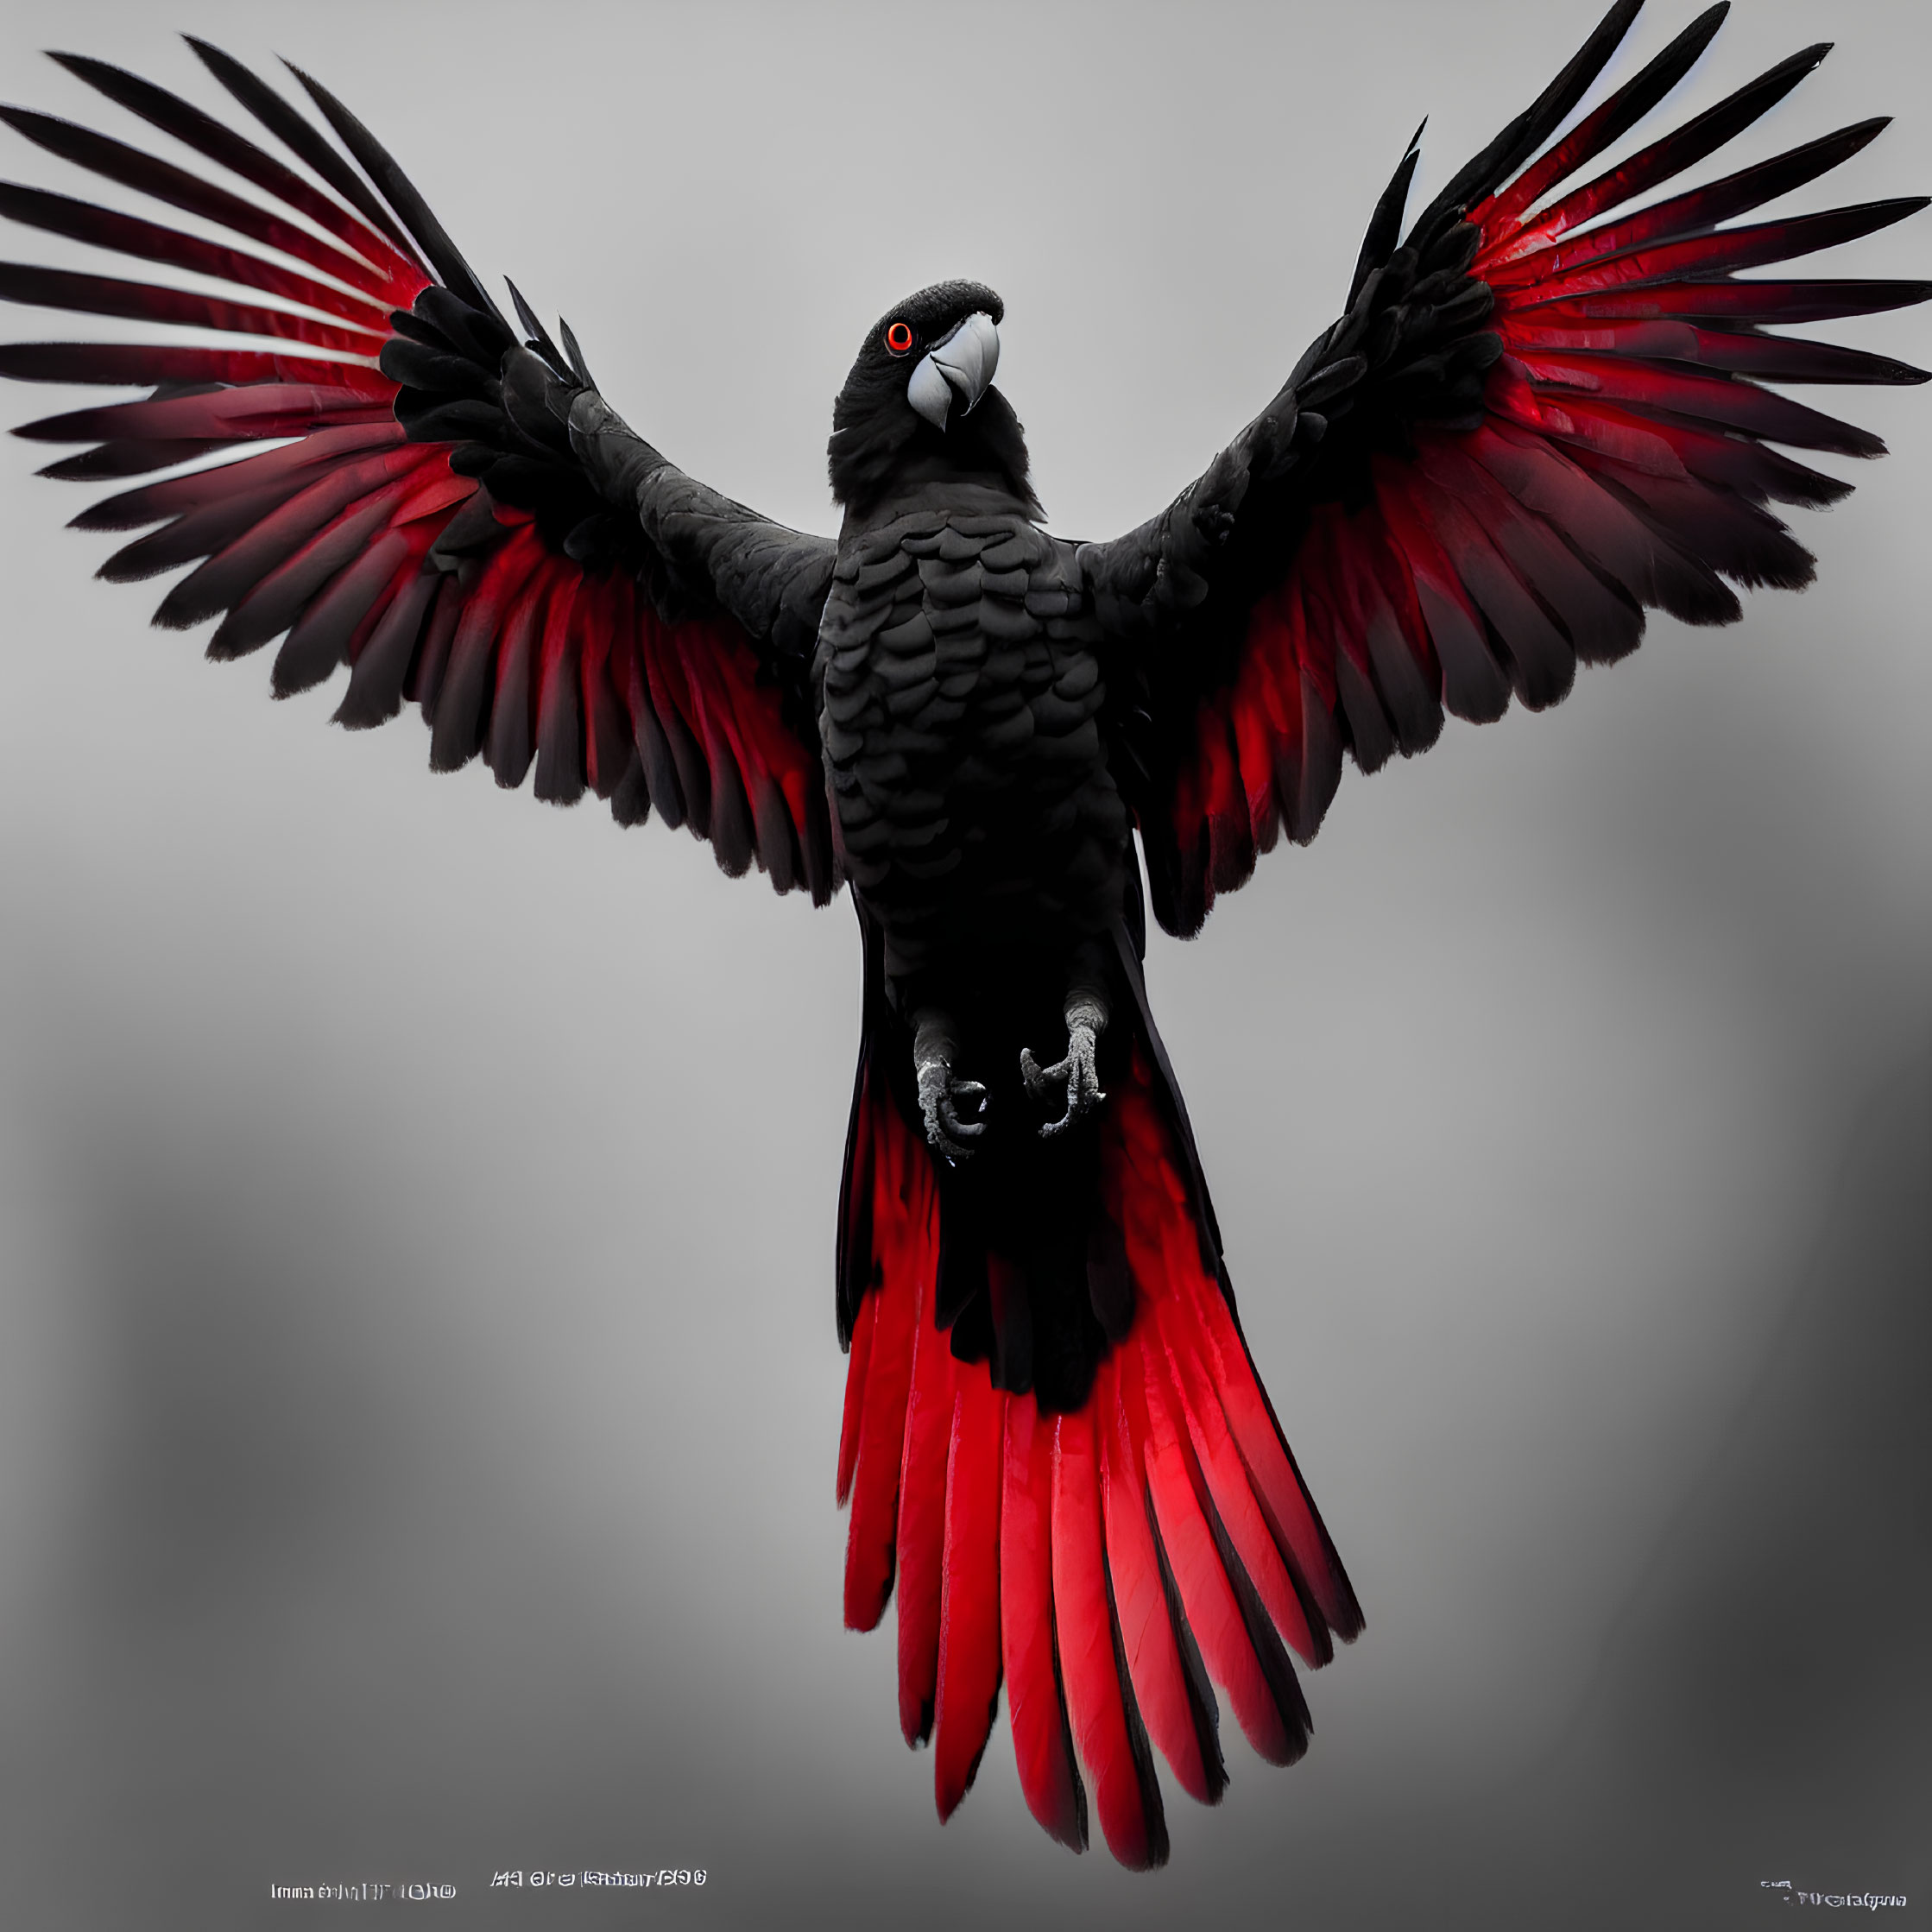 Black Cockatoo with Red Tail Feathers in Flight on Grey Background